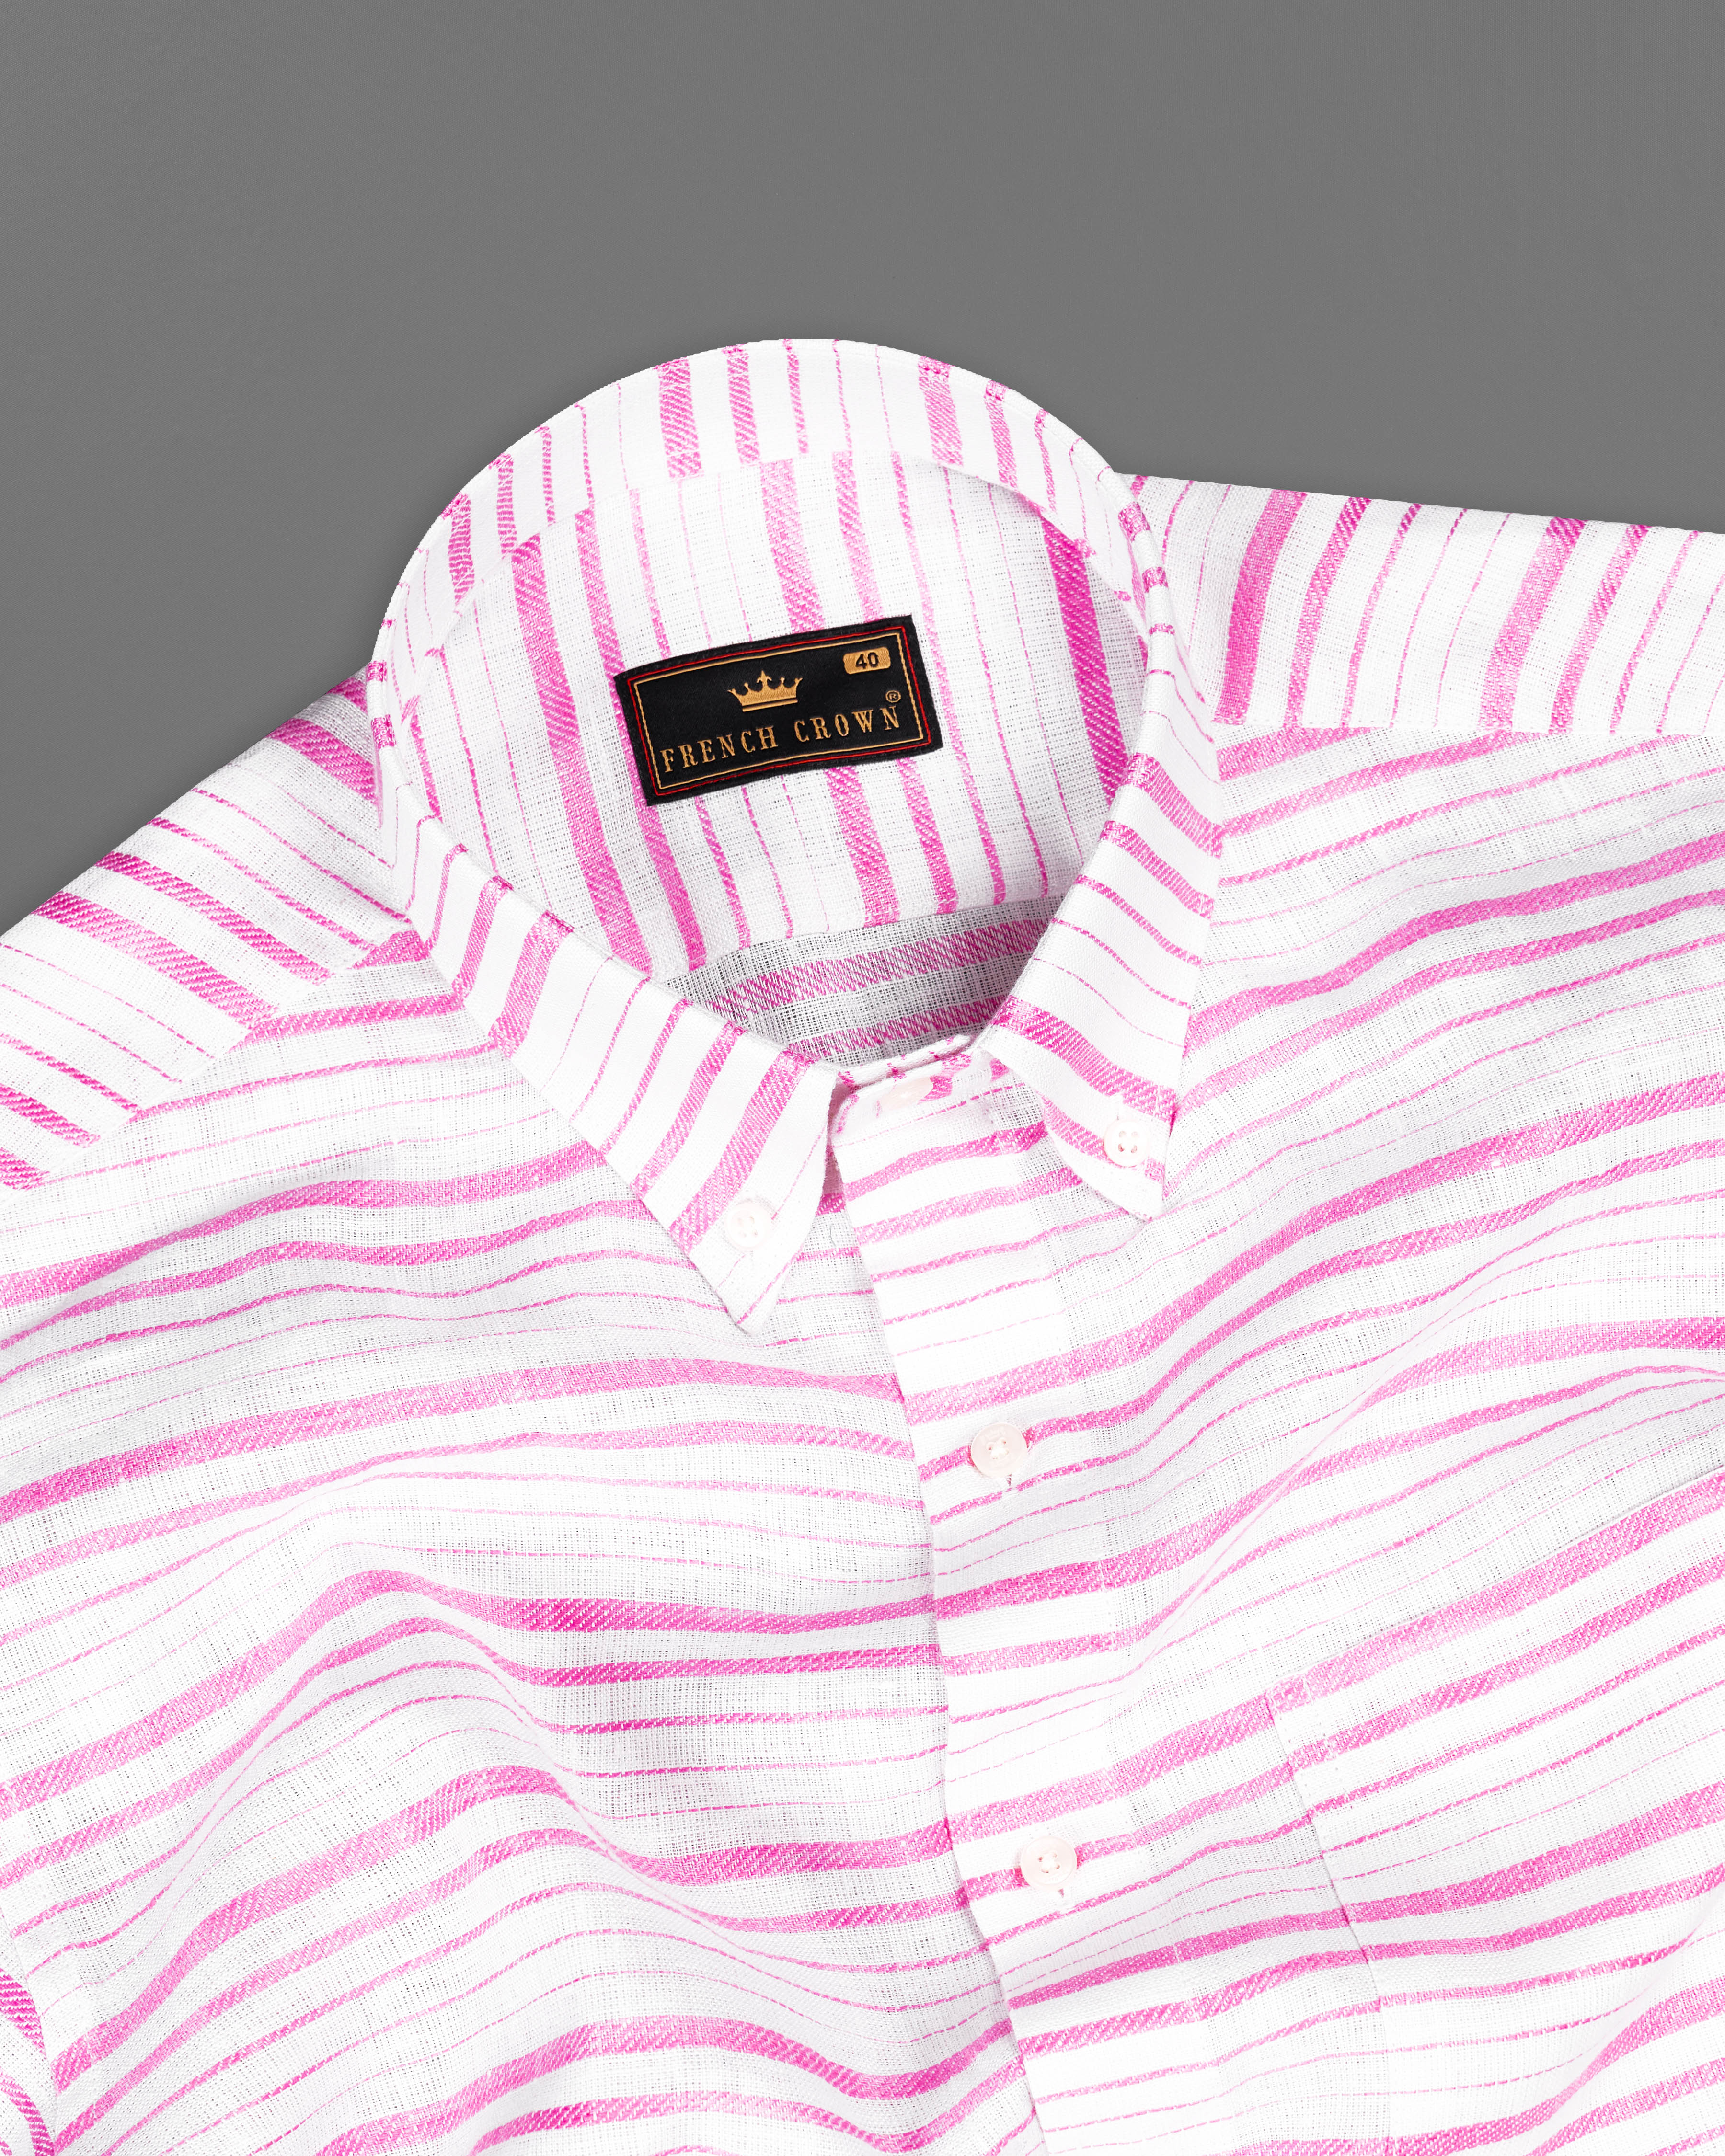 Bright White with Thulian Pink Striped Luxurious Linen Shirt 9218-BD-38,9218-BD-H-38,9218-BD-39,9218-BD-H-39,9218-BD-40,9218-BD-H-40,9218-BD-42,9218-BD-H-42,9218-BD-44,9218-BD-H-44,9218-BD-46,9218-BD-H-46,9218-BD-48,9218-BD-H-48,9218-BD-50,9218-BD-H-50,9218-BD-52,9218-BD-H-52